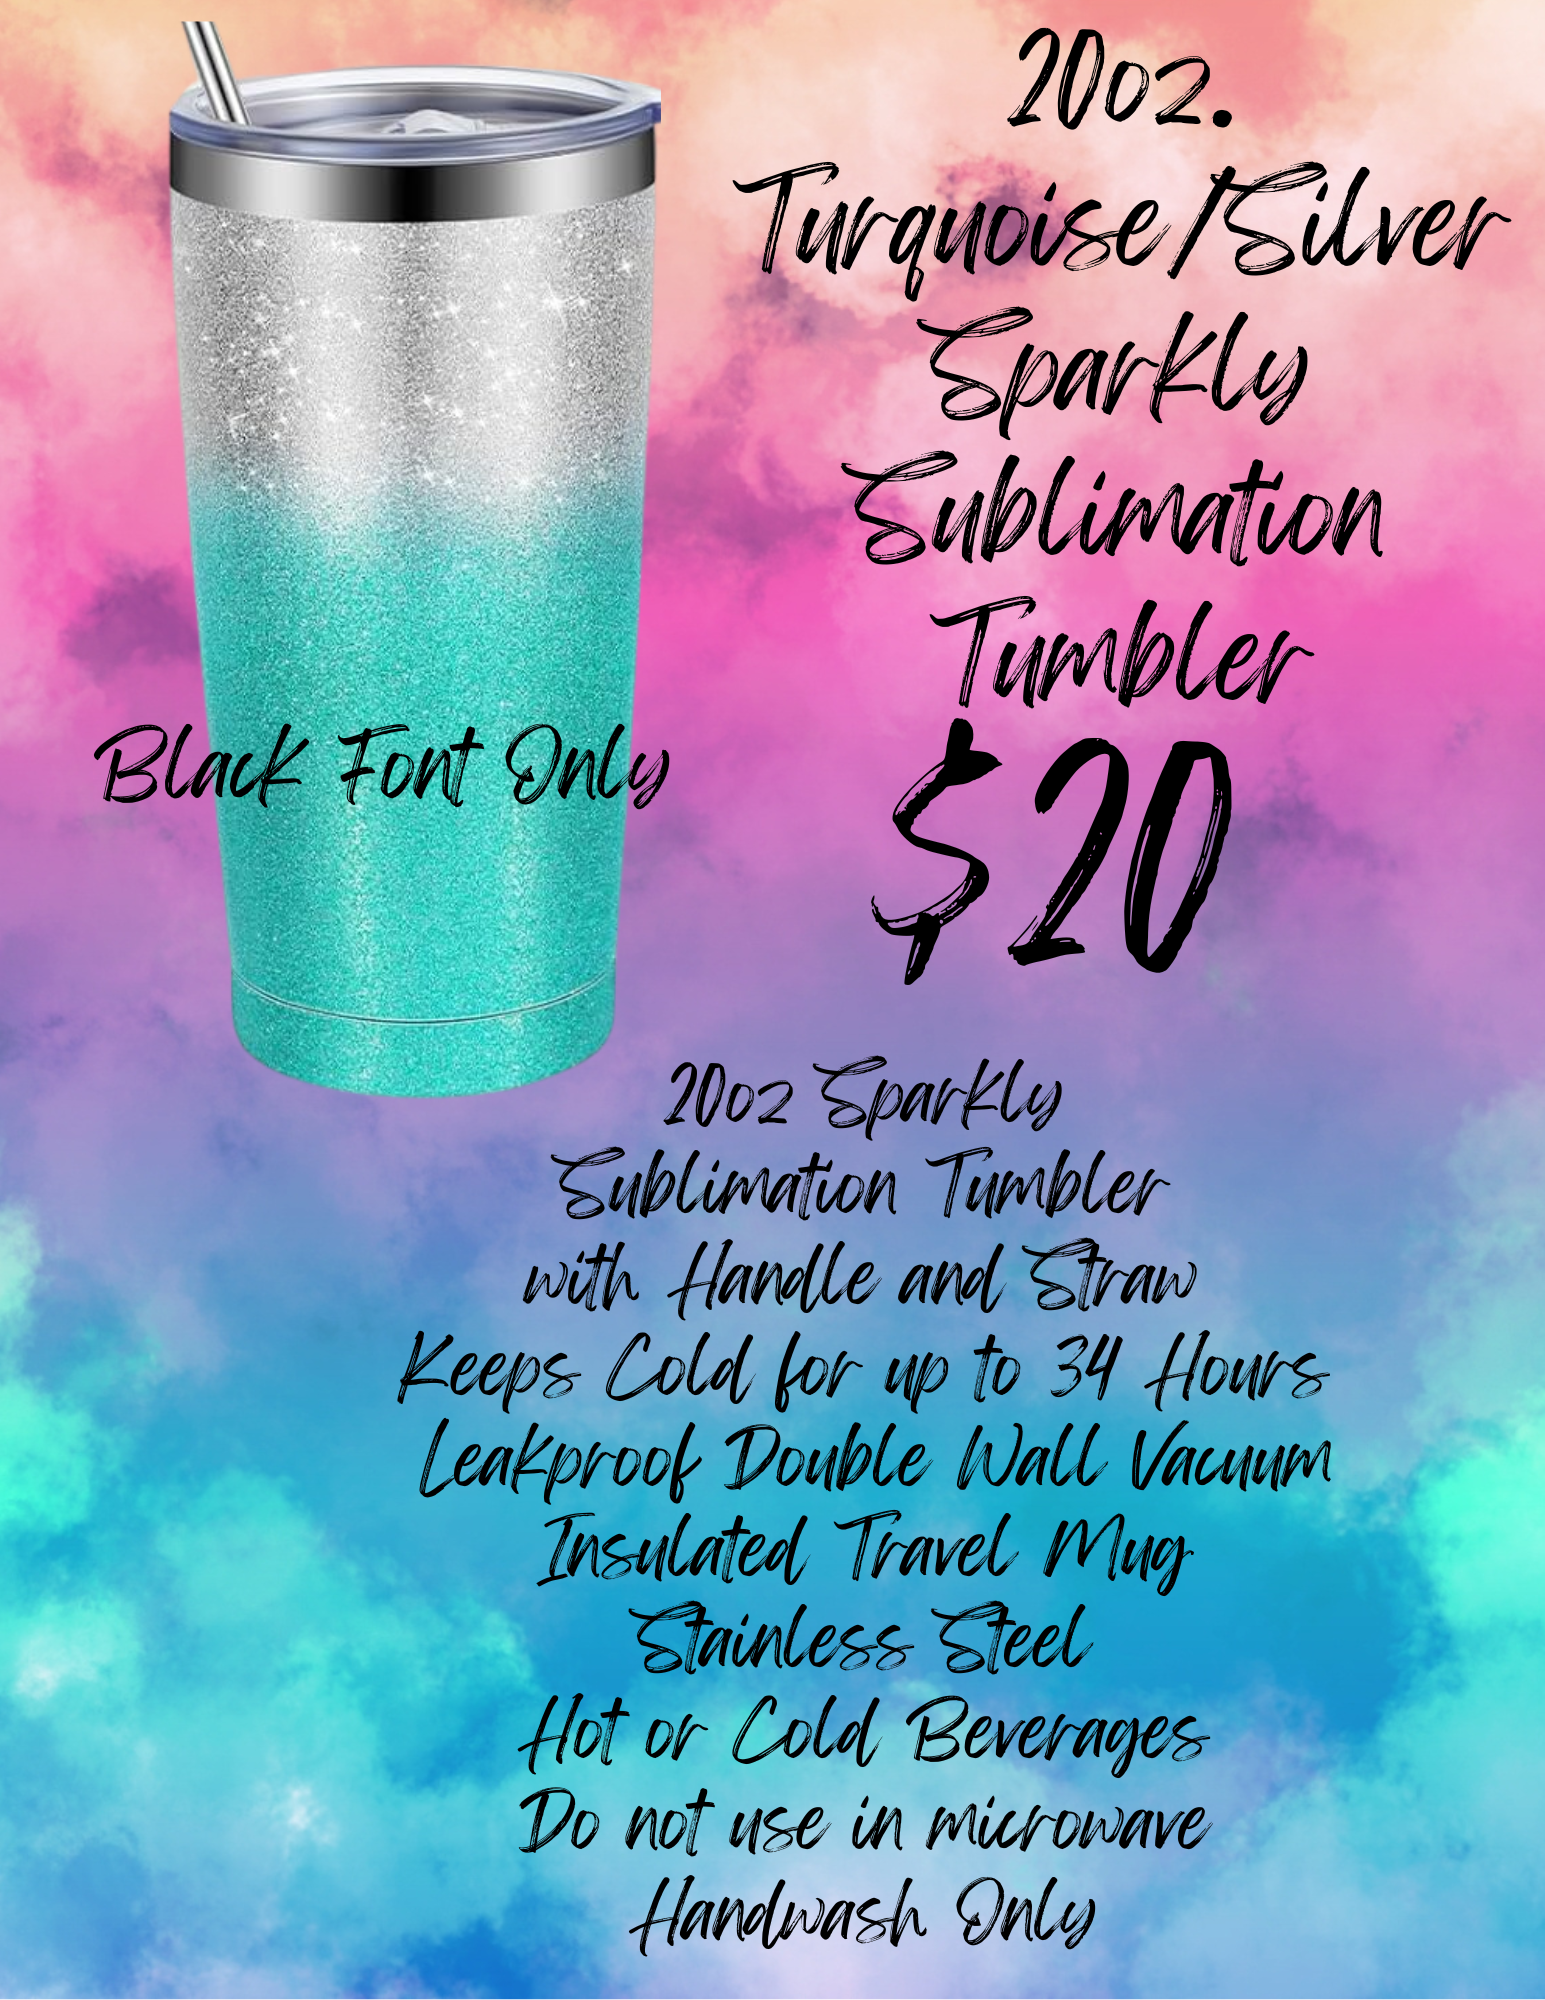 20oz Turquoise/Silver Sparkly Tumbler (Sublimation) *BLACK FONT ONLY*